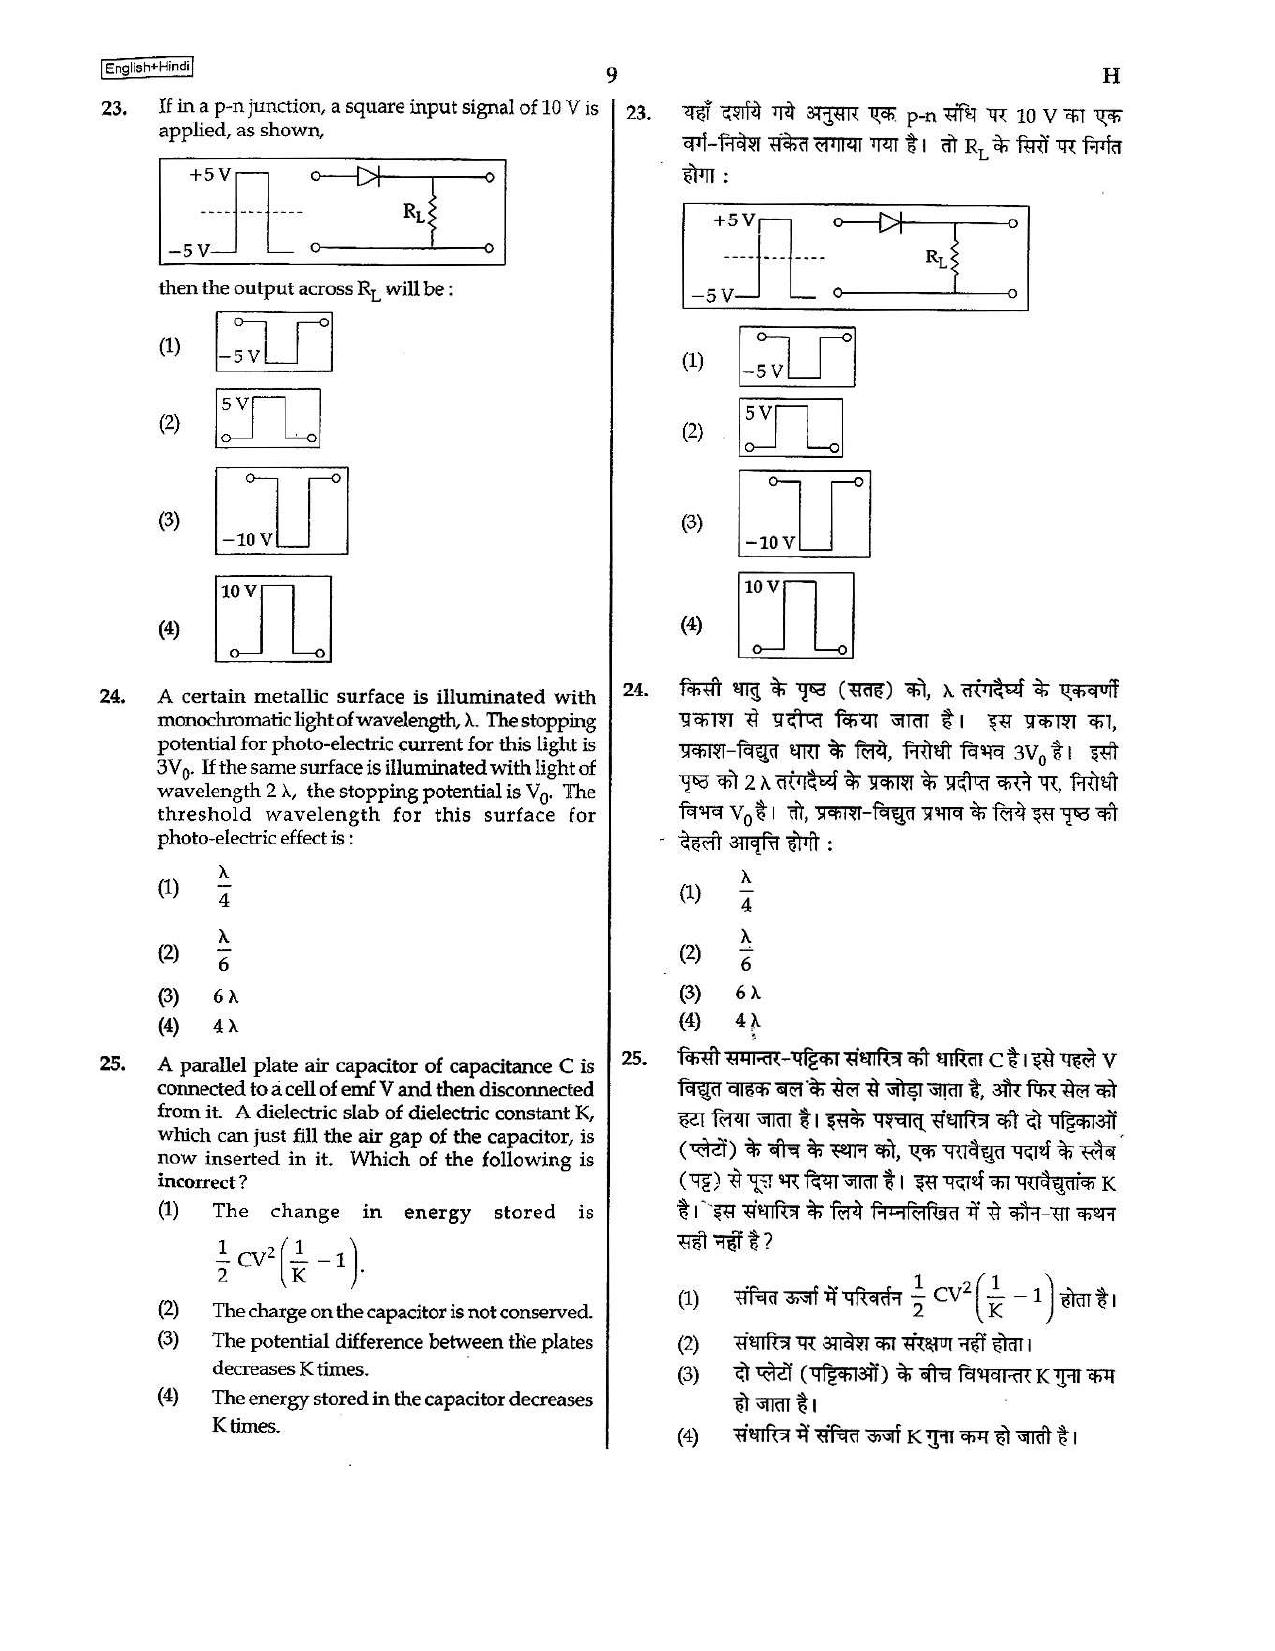 NEET Code H 2015 Question Paper - Page 9